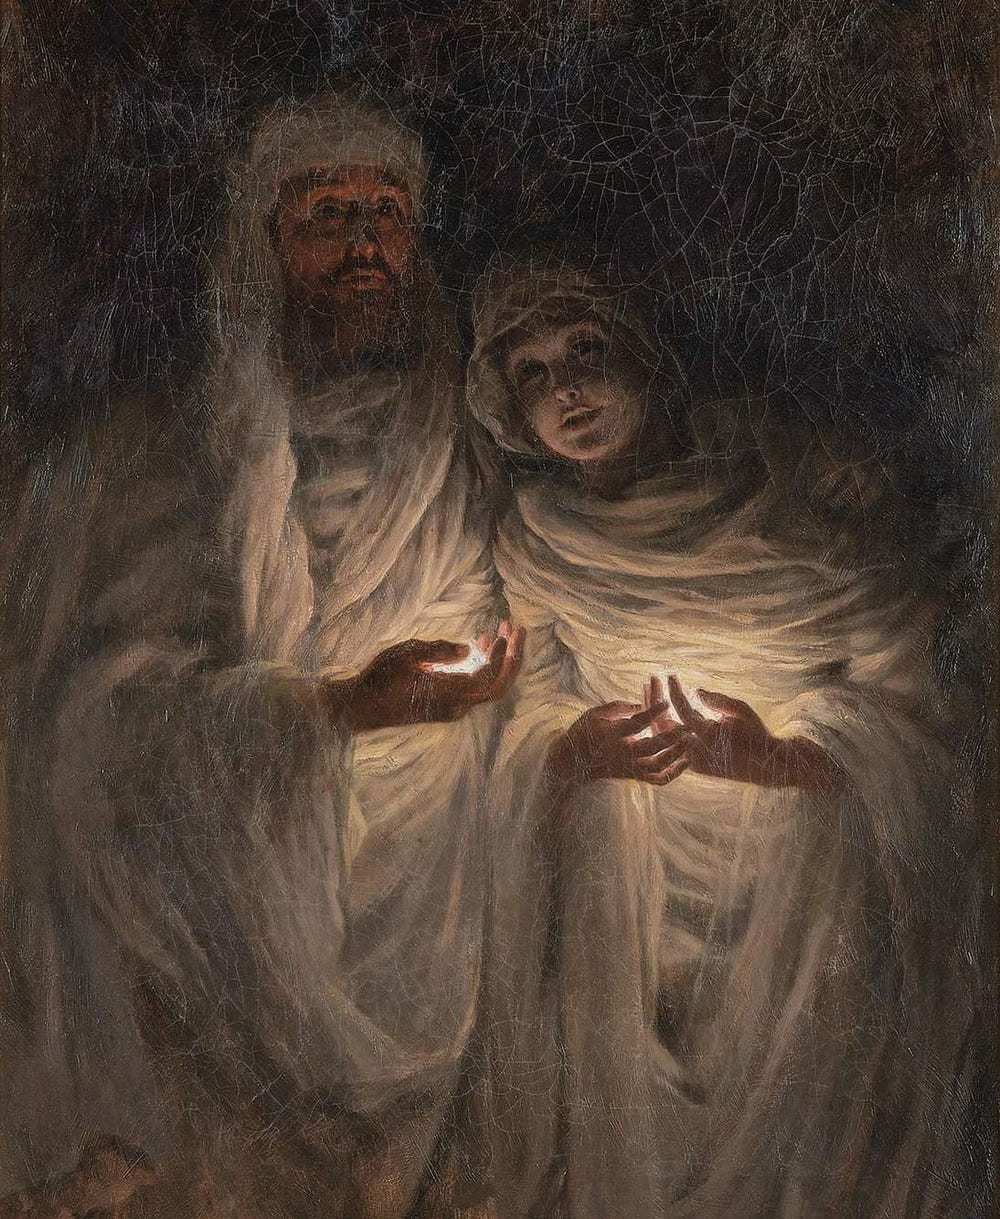 Two people in white robes with glowing light in their hands